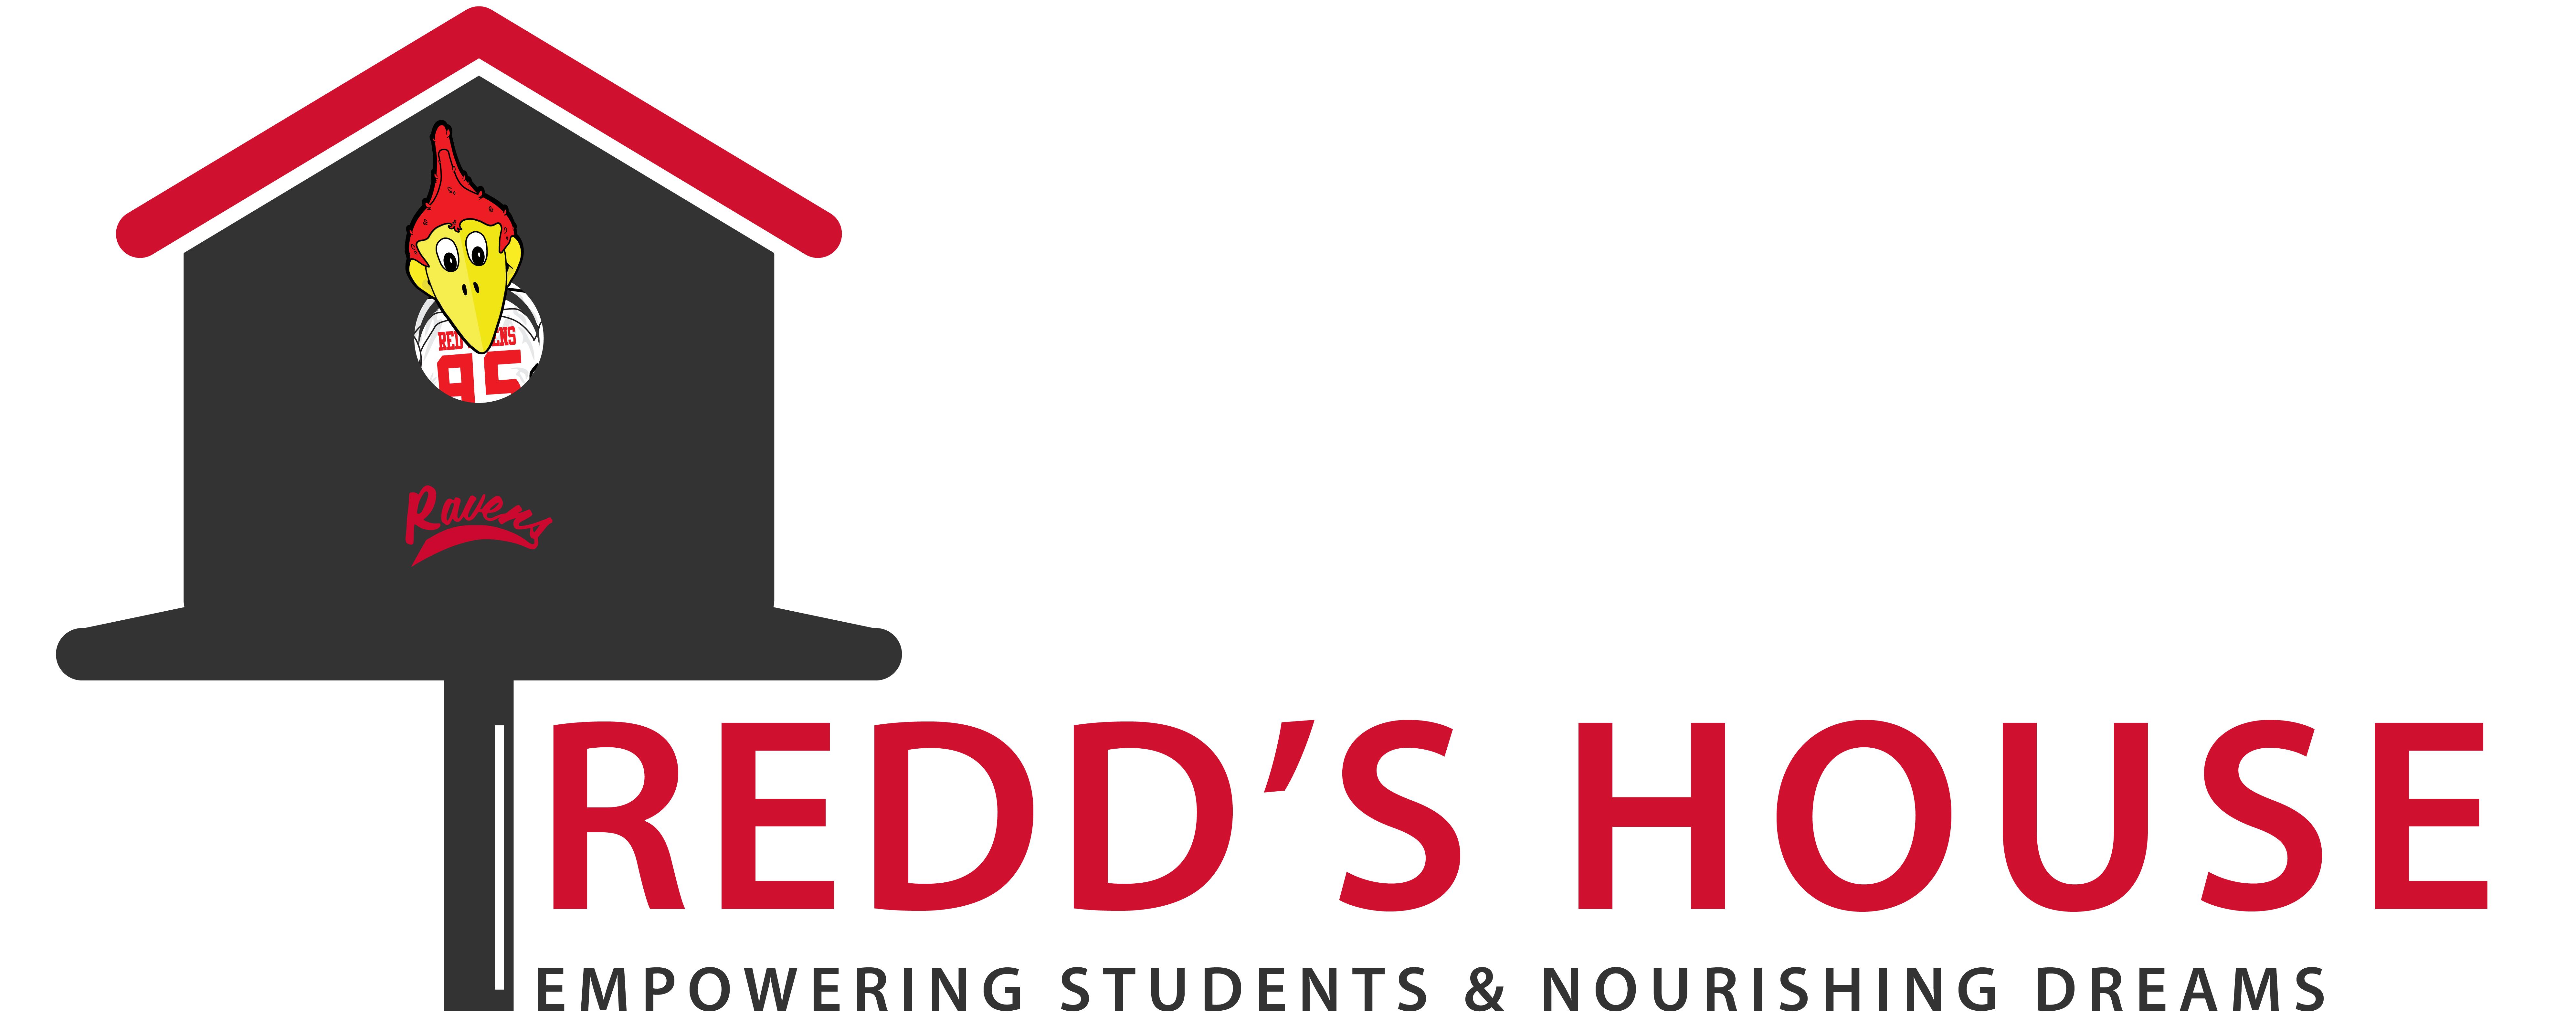 Redd's House Logo with bird house and the slogan Empowering students & Nourishing Dreams